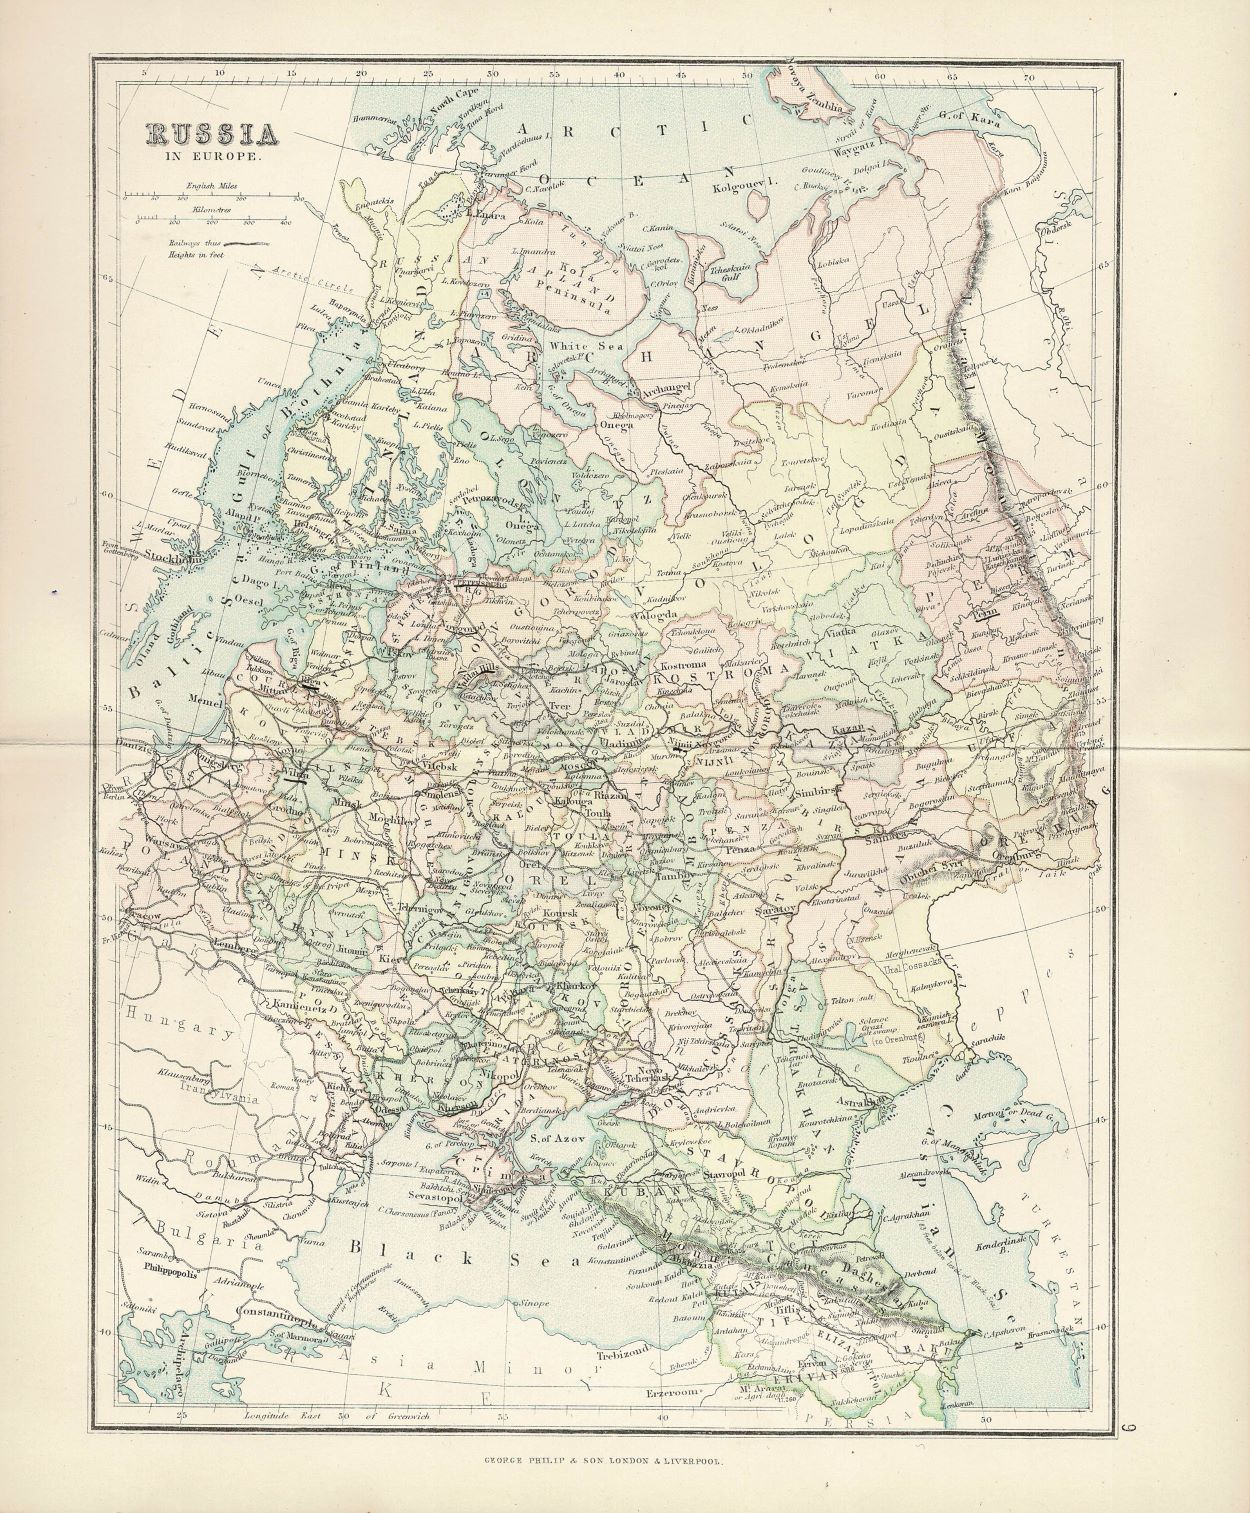 Russia in Europe, Antique Map, 1886